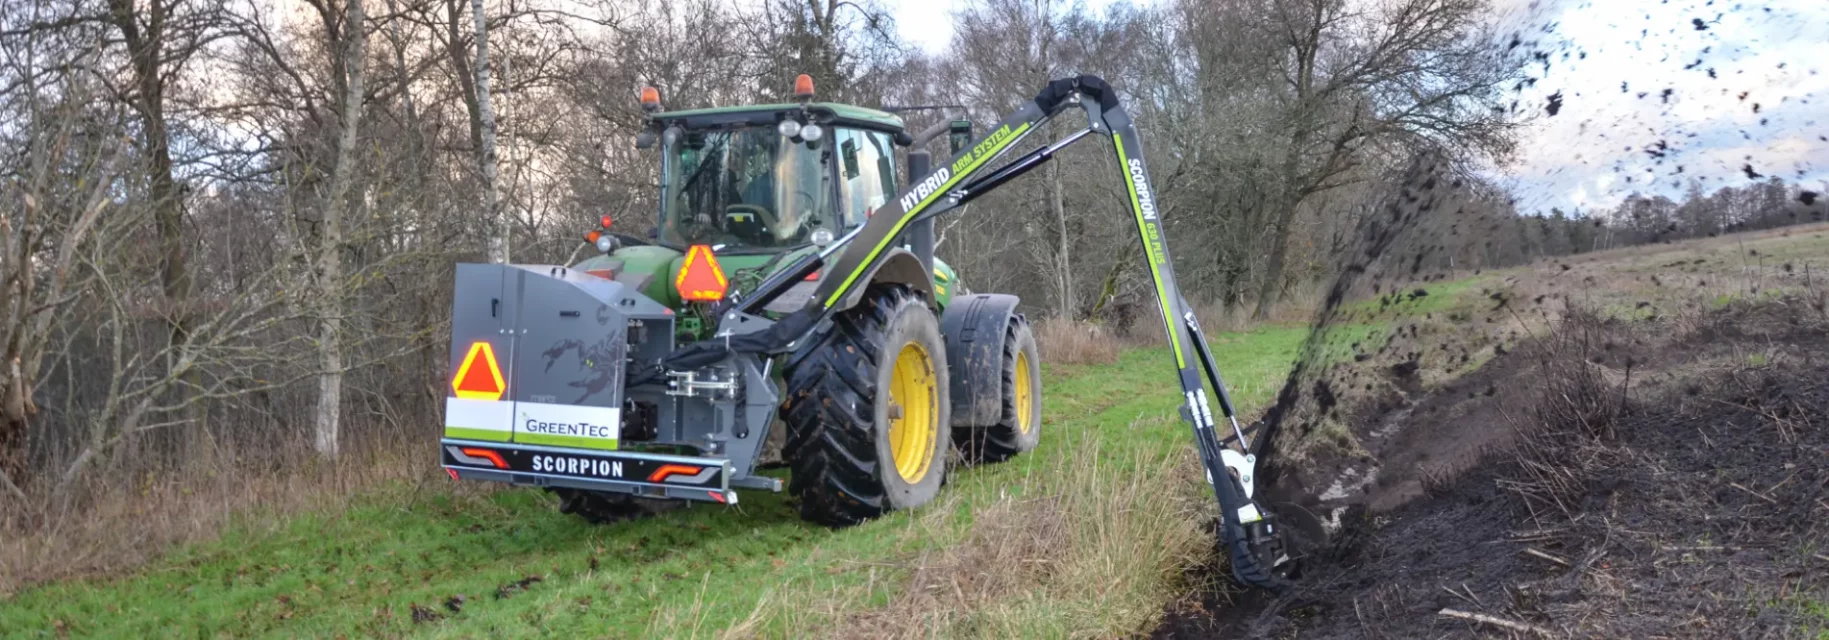 Ditch cleaning equipment for tractor